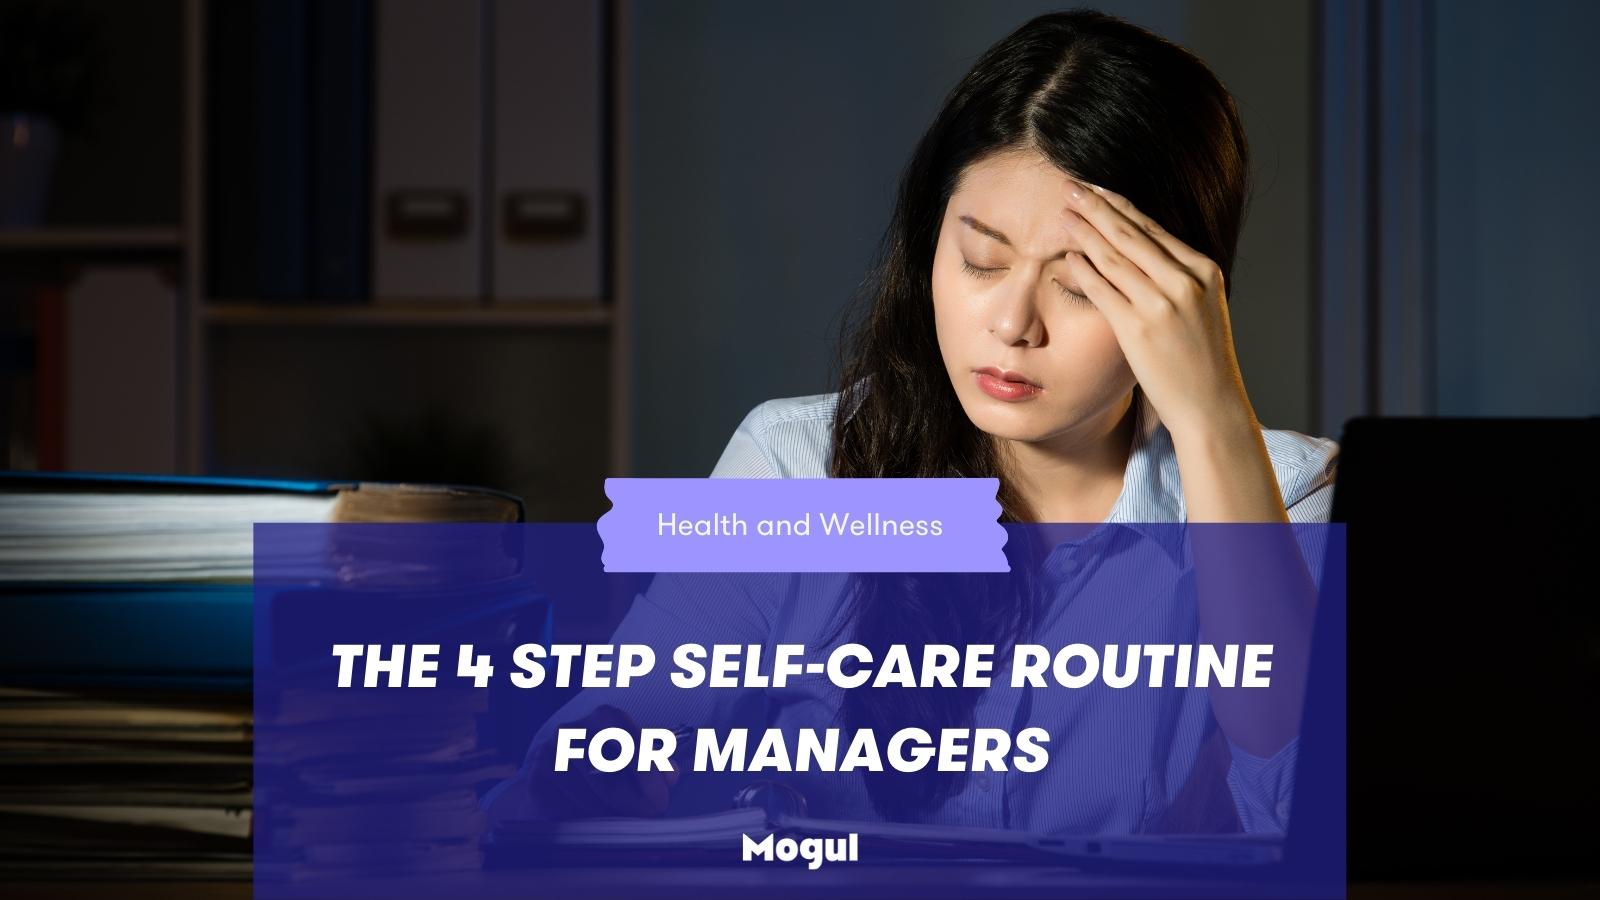 The 4 Step Self-Care Routine For Managers